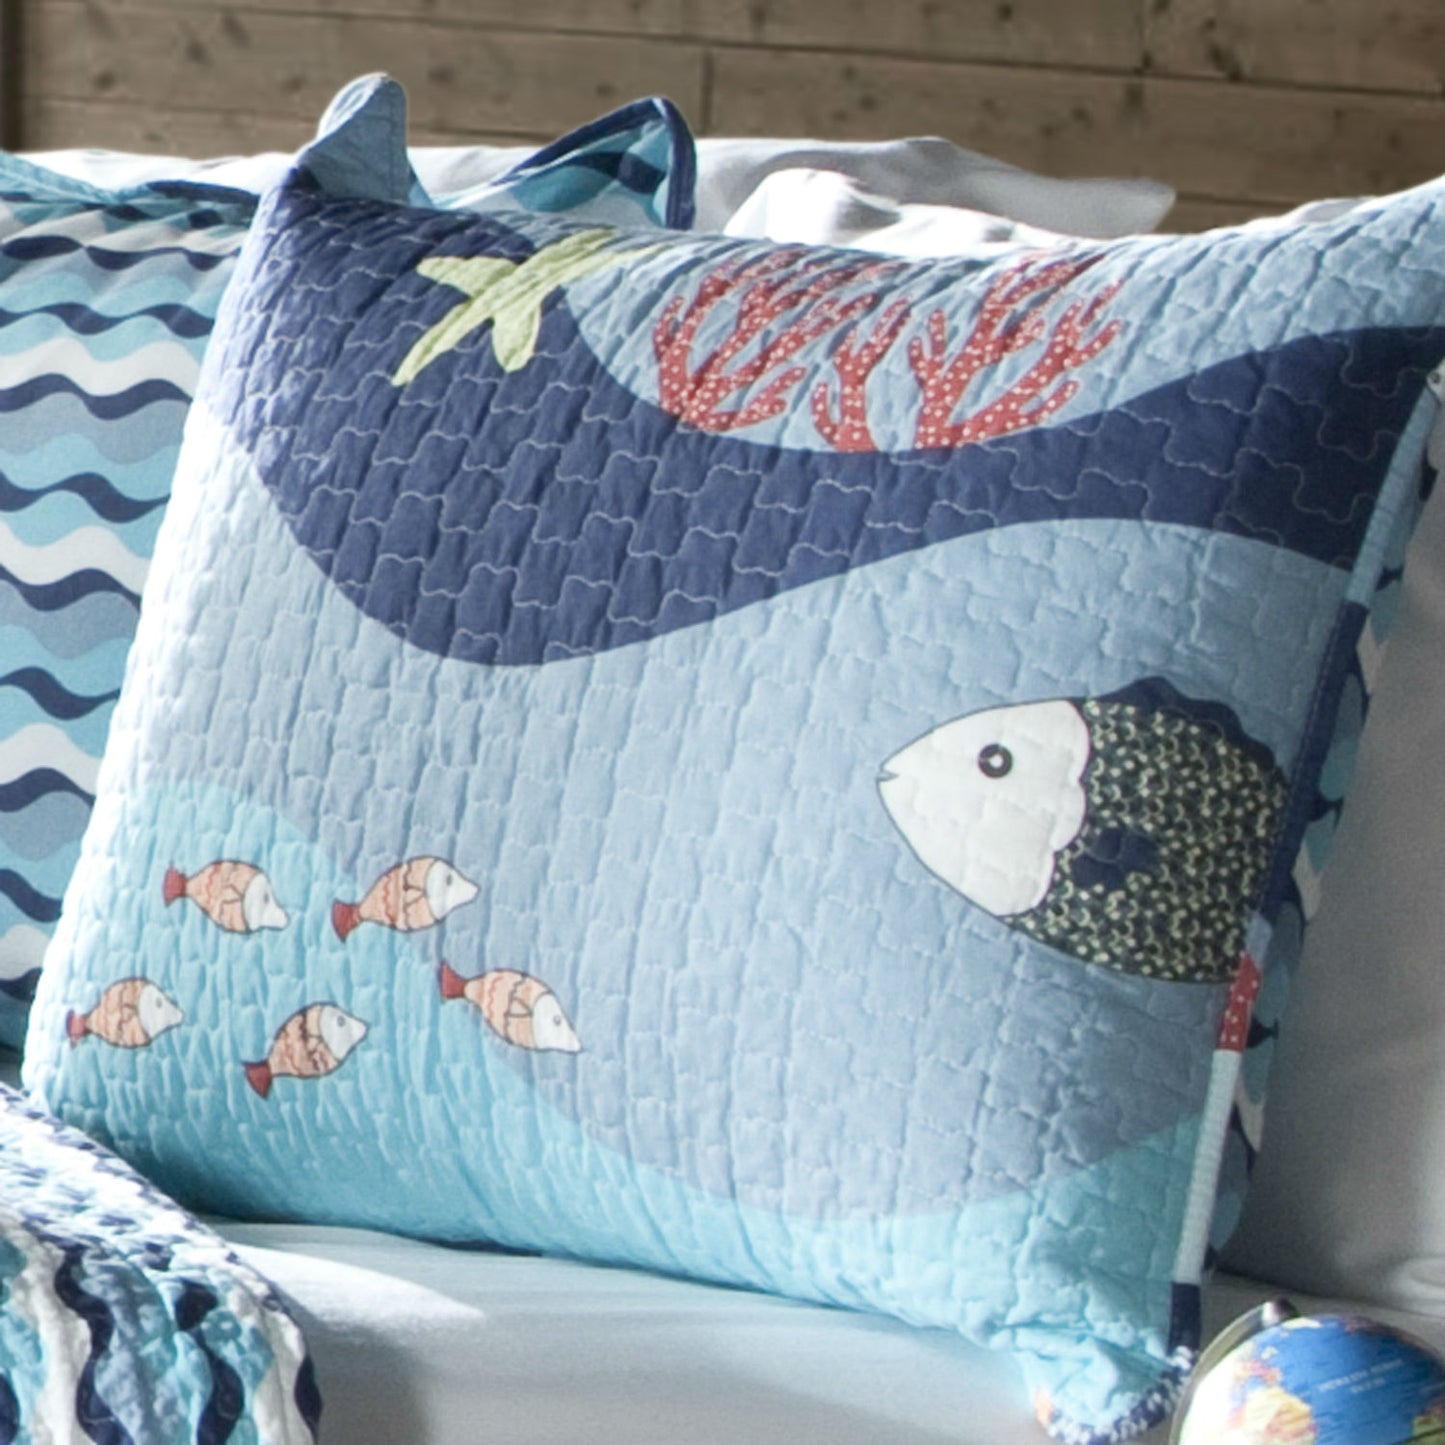 Twin Blue Serenity Sea Fish Coral Coverlet Quilt Bedspread Set